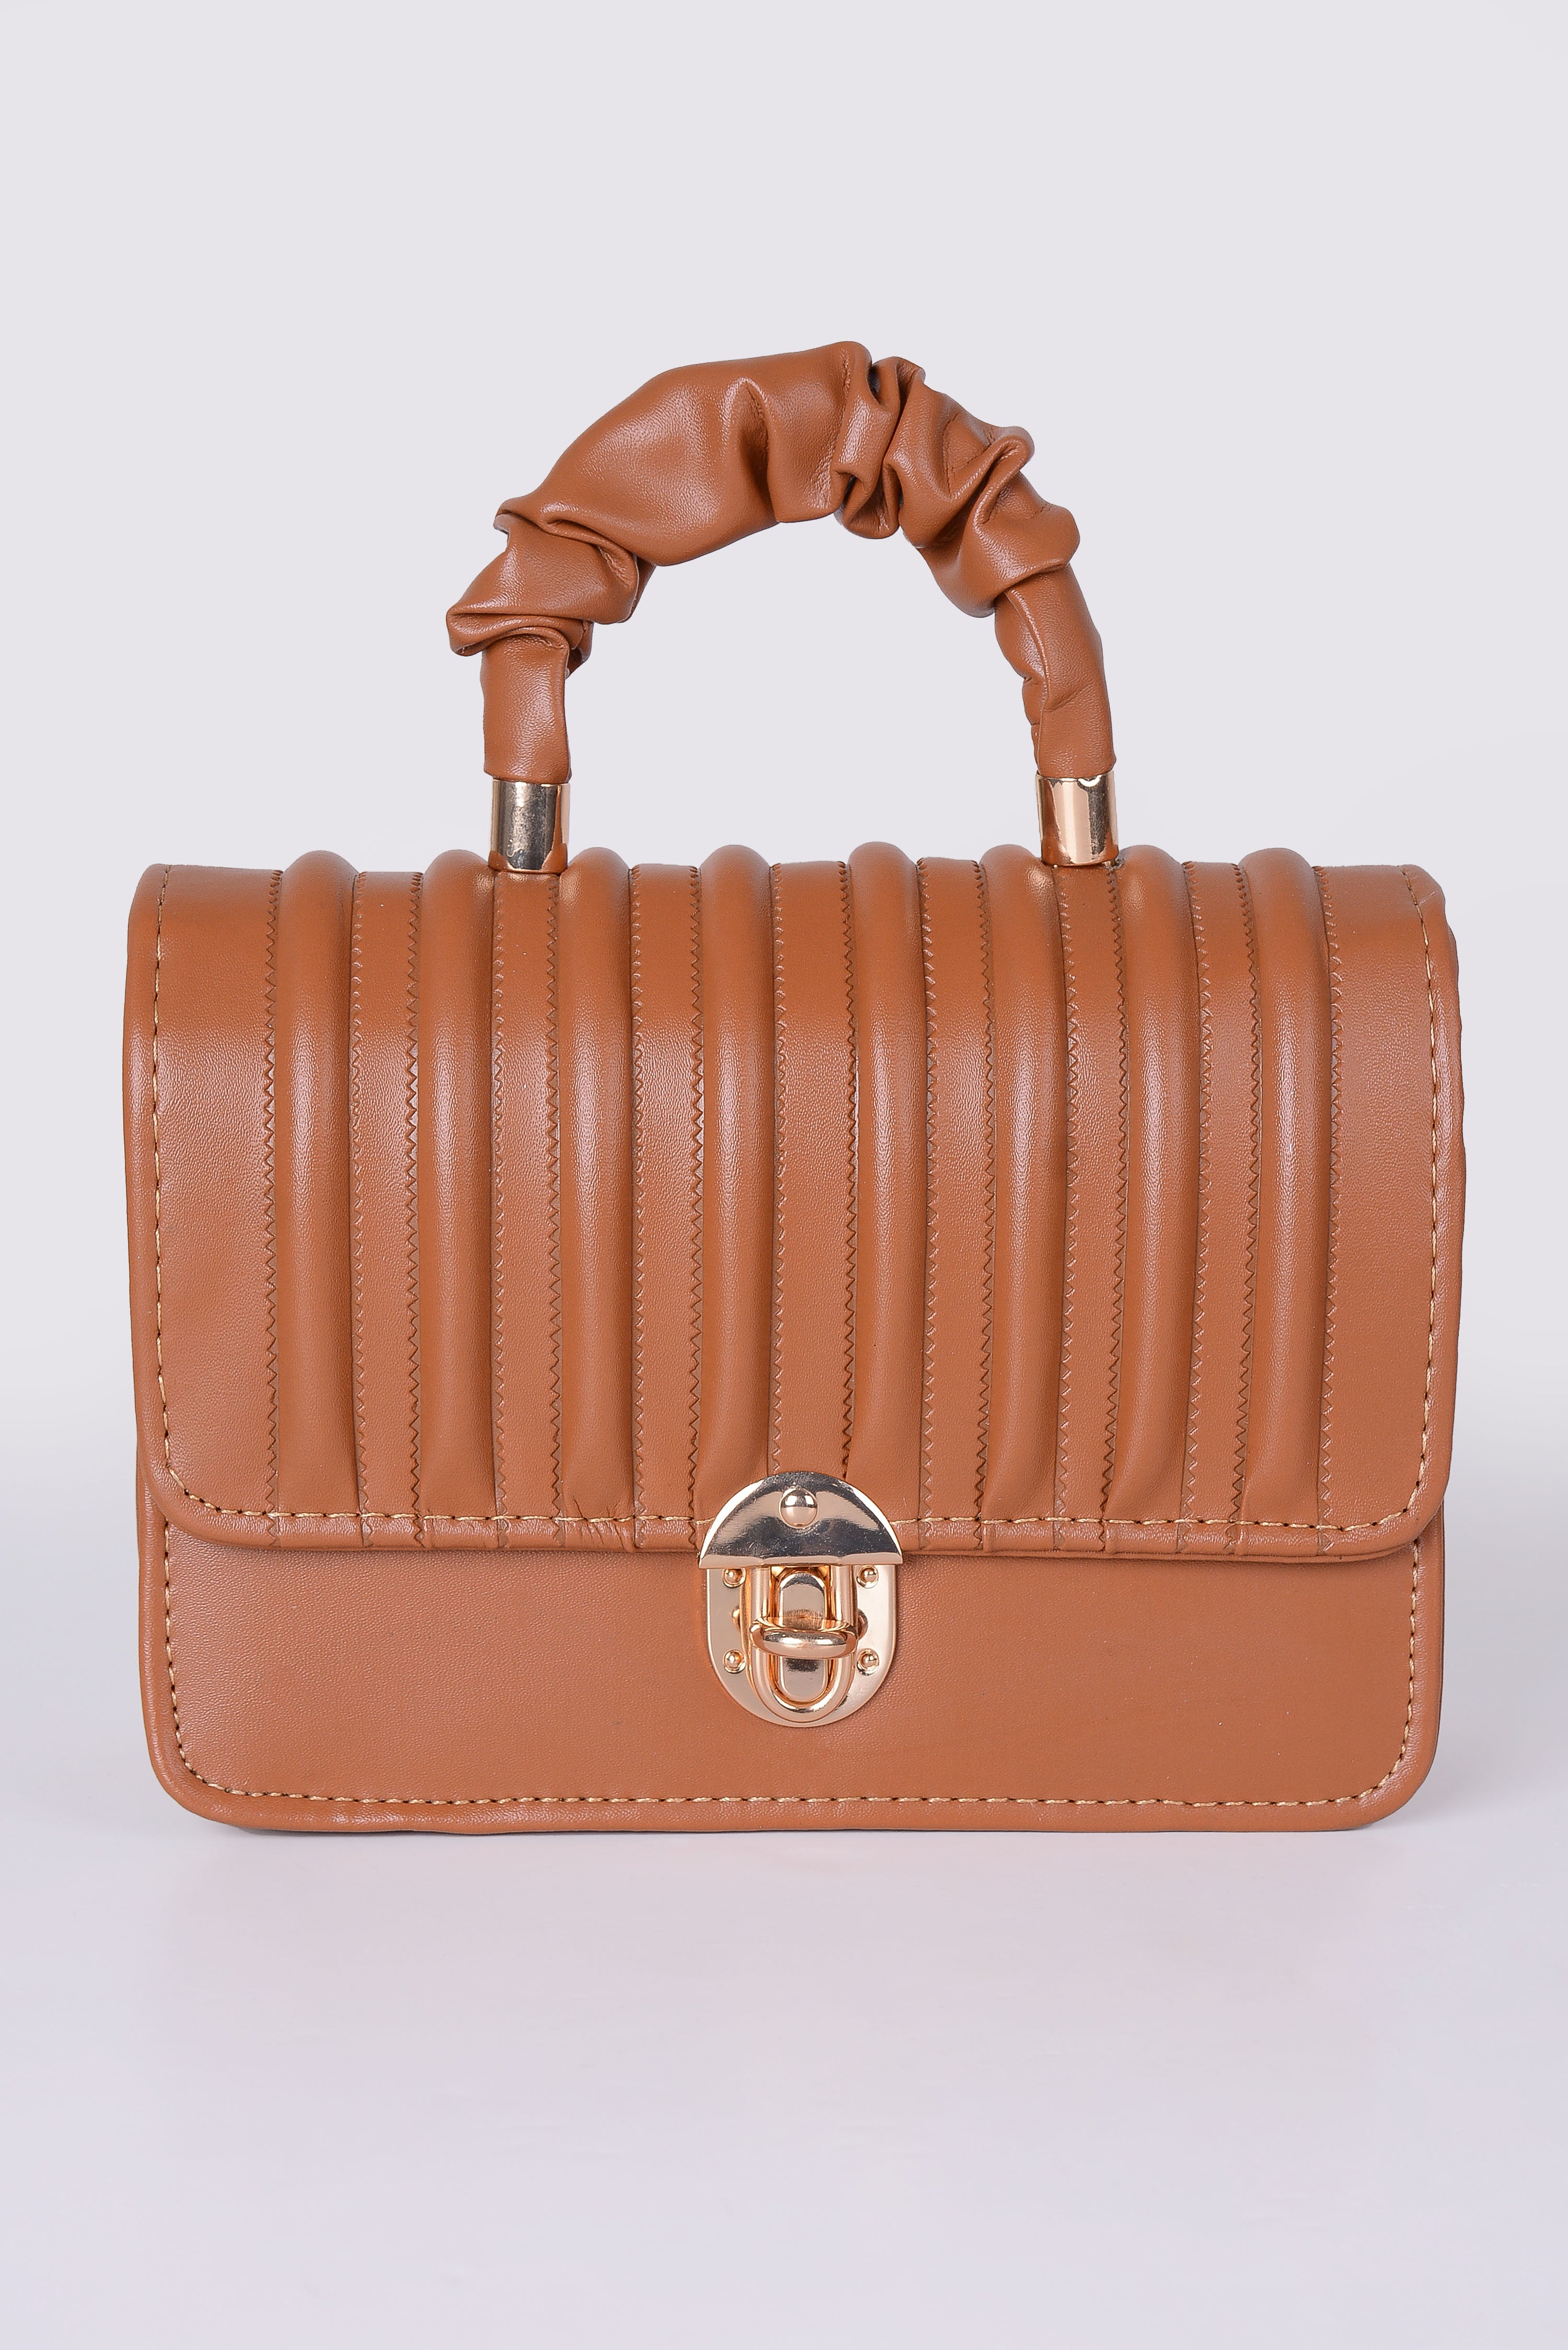 Hand Bags for Women |Ladies Purse A43-112-A